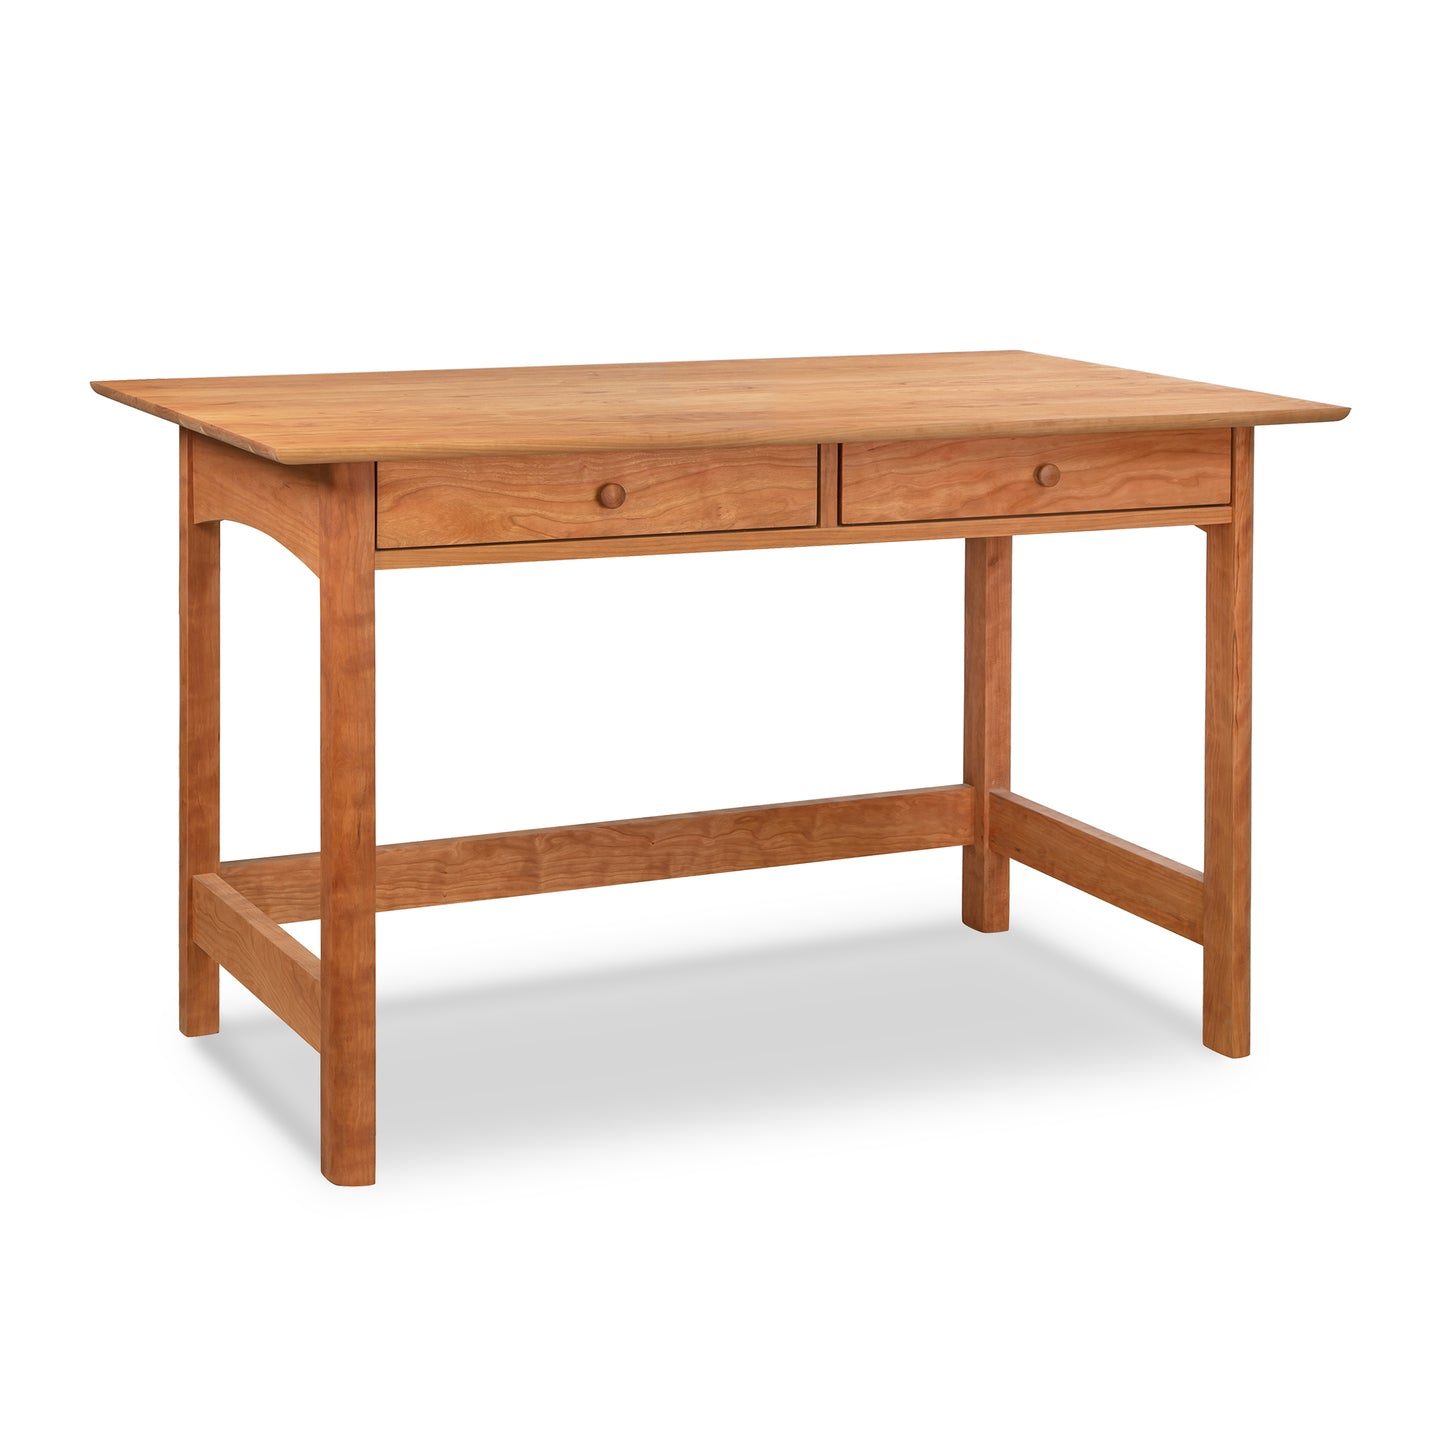 A Heartwood Shaker Writing Desk with two drawers, isolated on a white background.